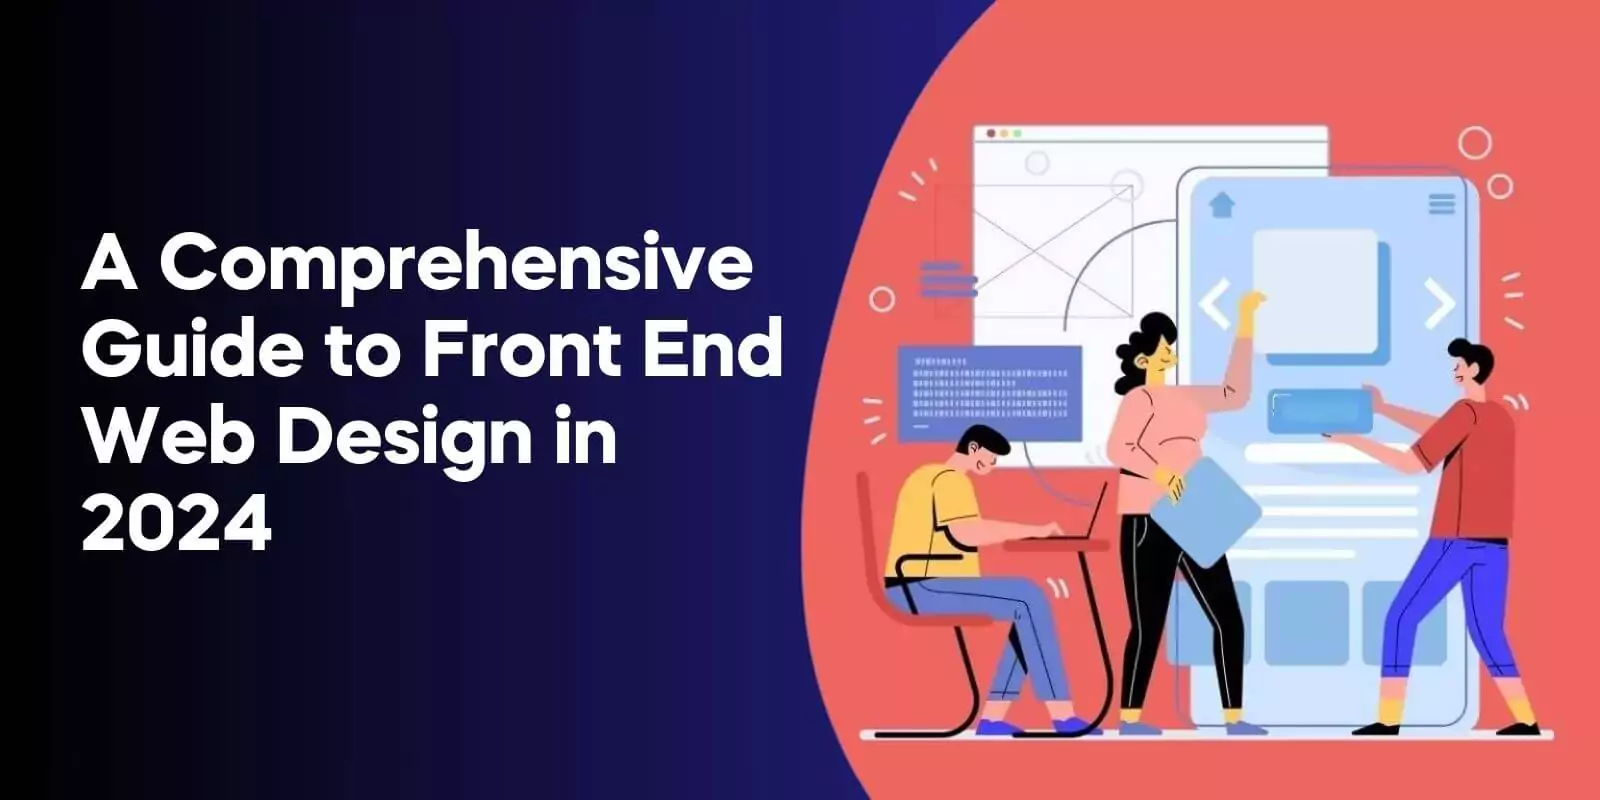 A Comprehensive Guide to Front End Web Design in 2024